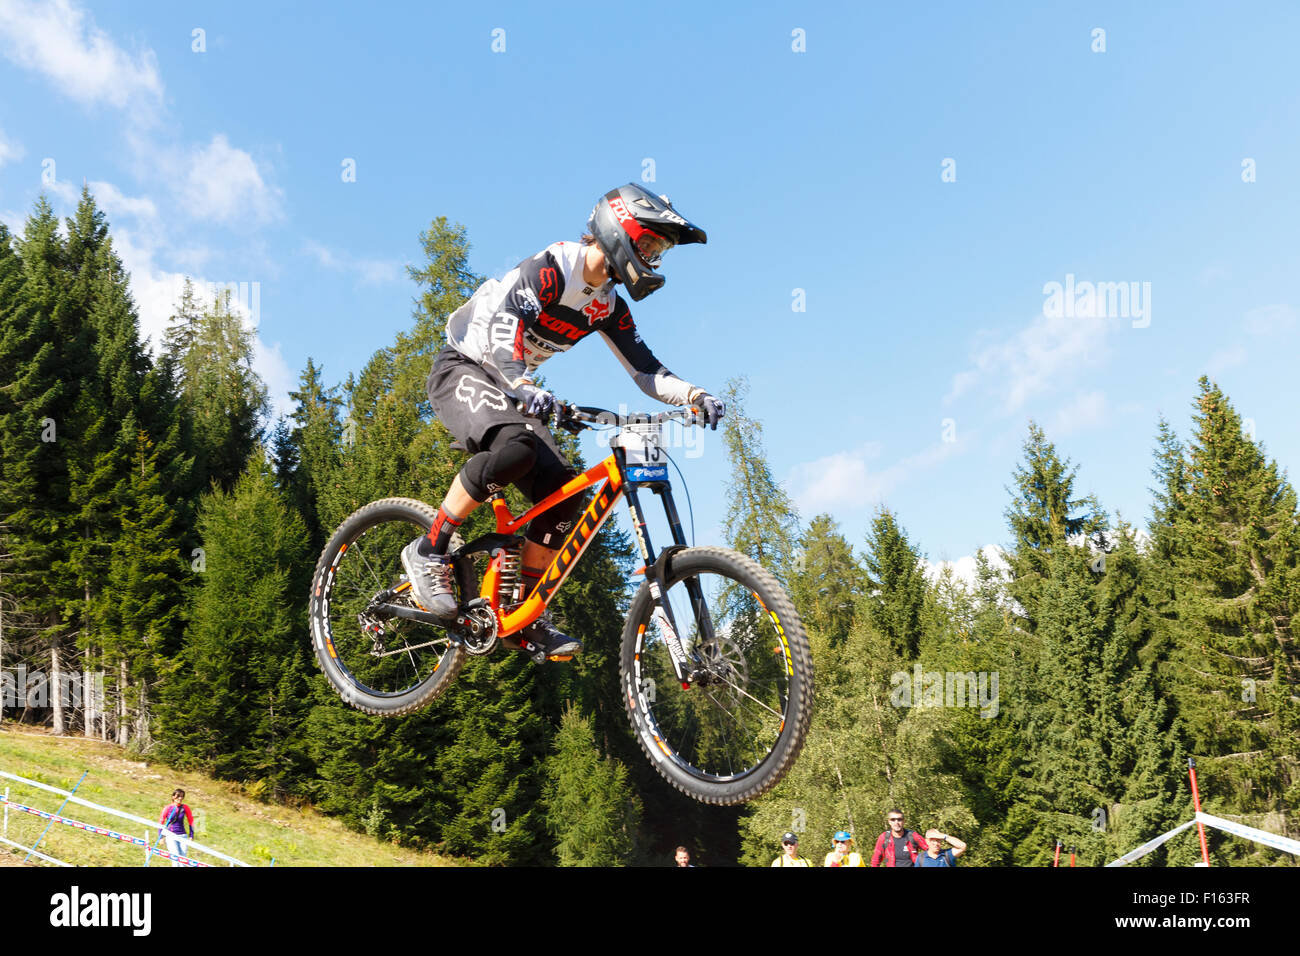 Val Di Sole, Italy - 22 August 2015: Kona Factory Team rider Fearon Connor,  in action during the mens elite Downhill final World Cup at the Uci Mountain  Bike in Val di